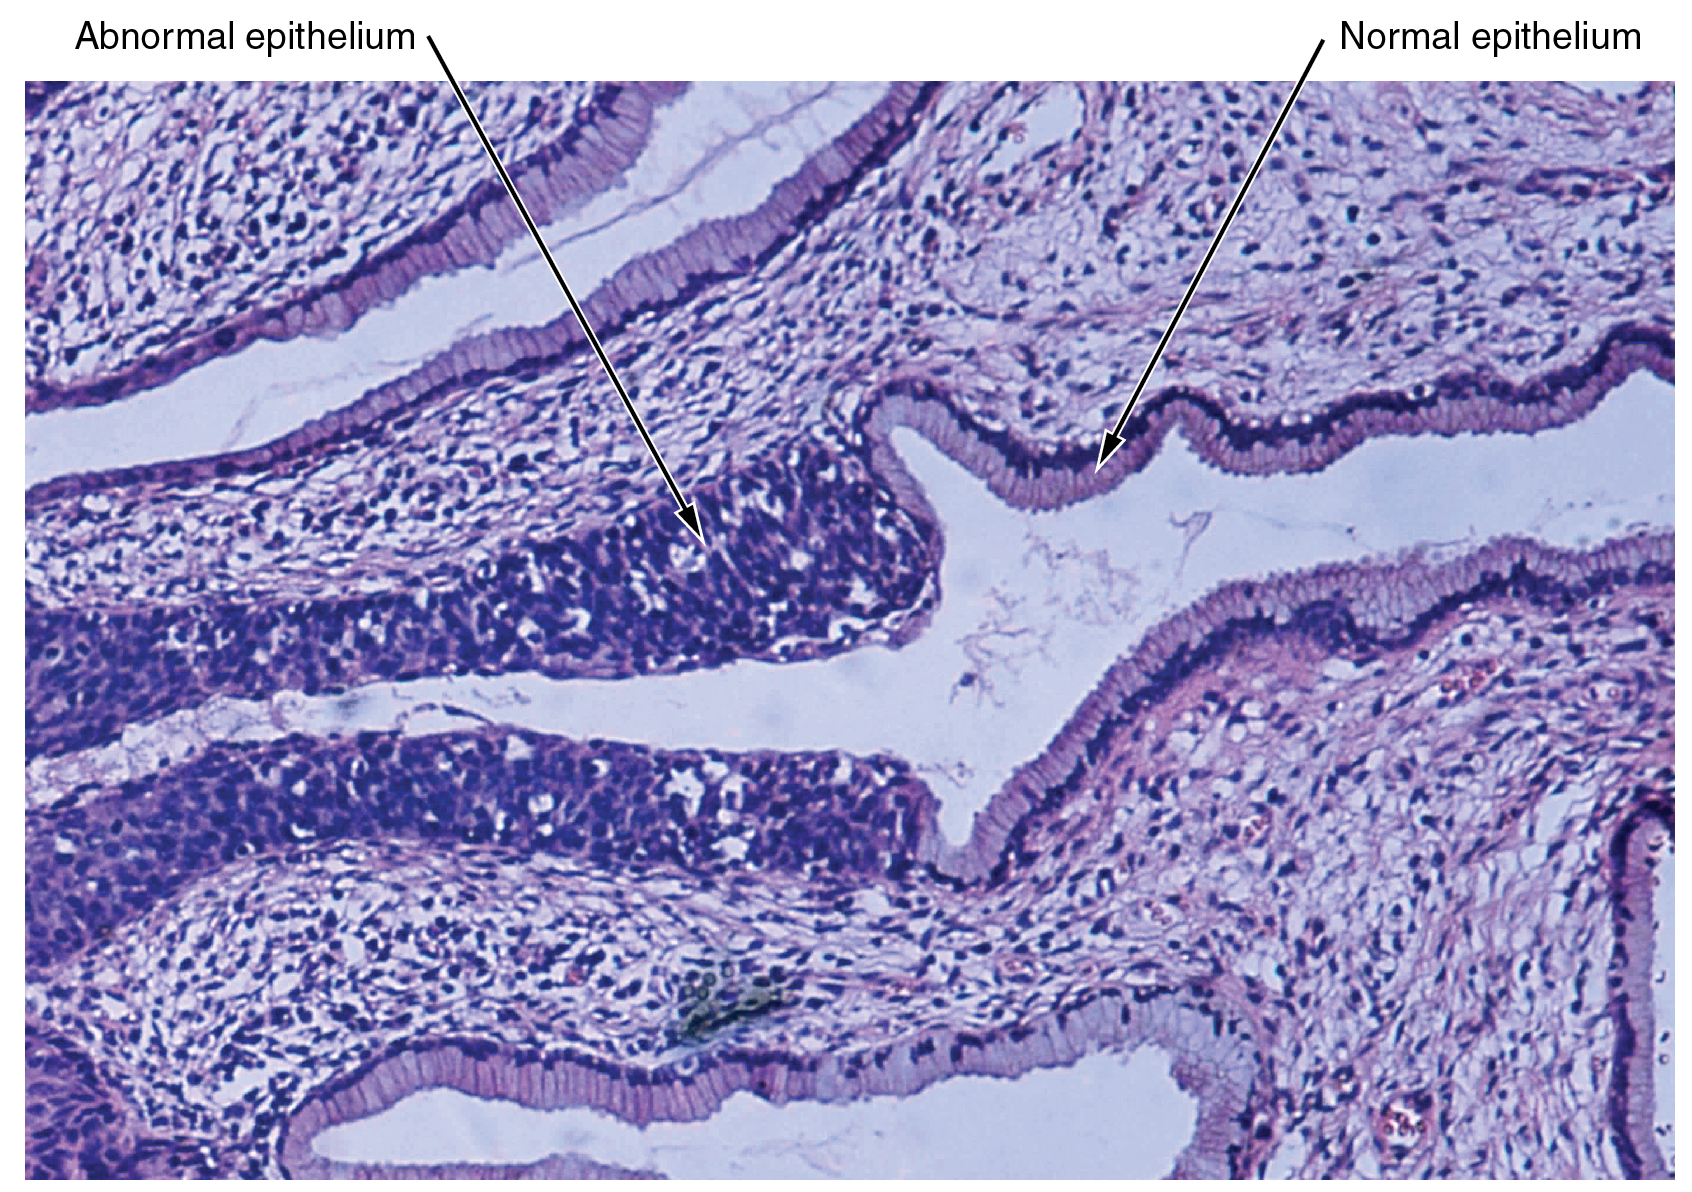 400_Micrograph_of_Cervical_Tissue_updated.jpg